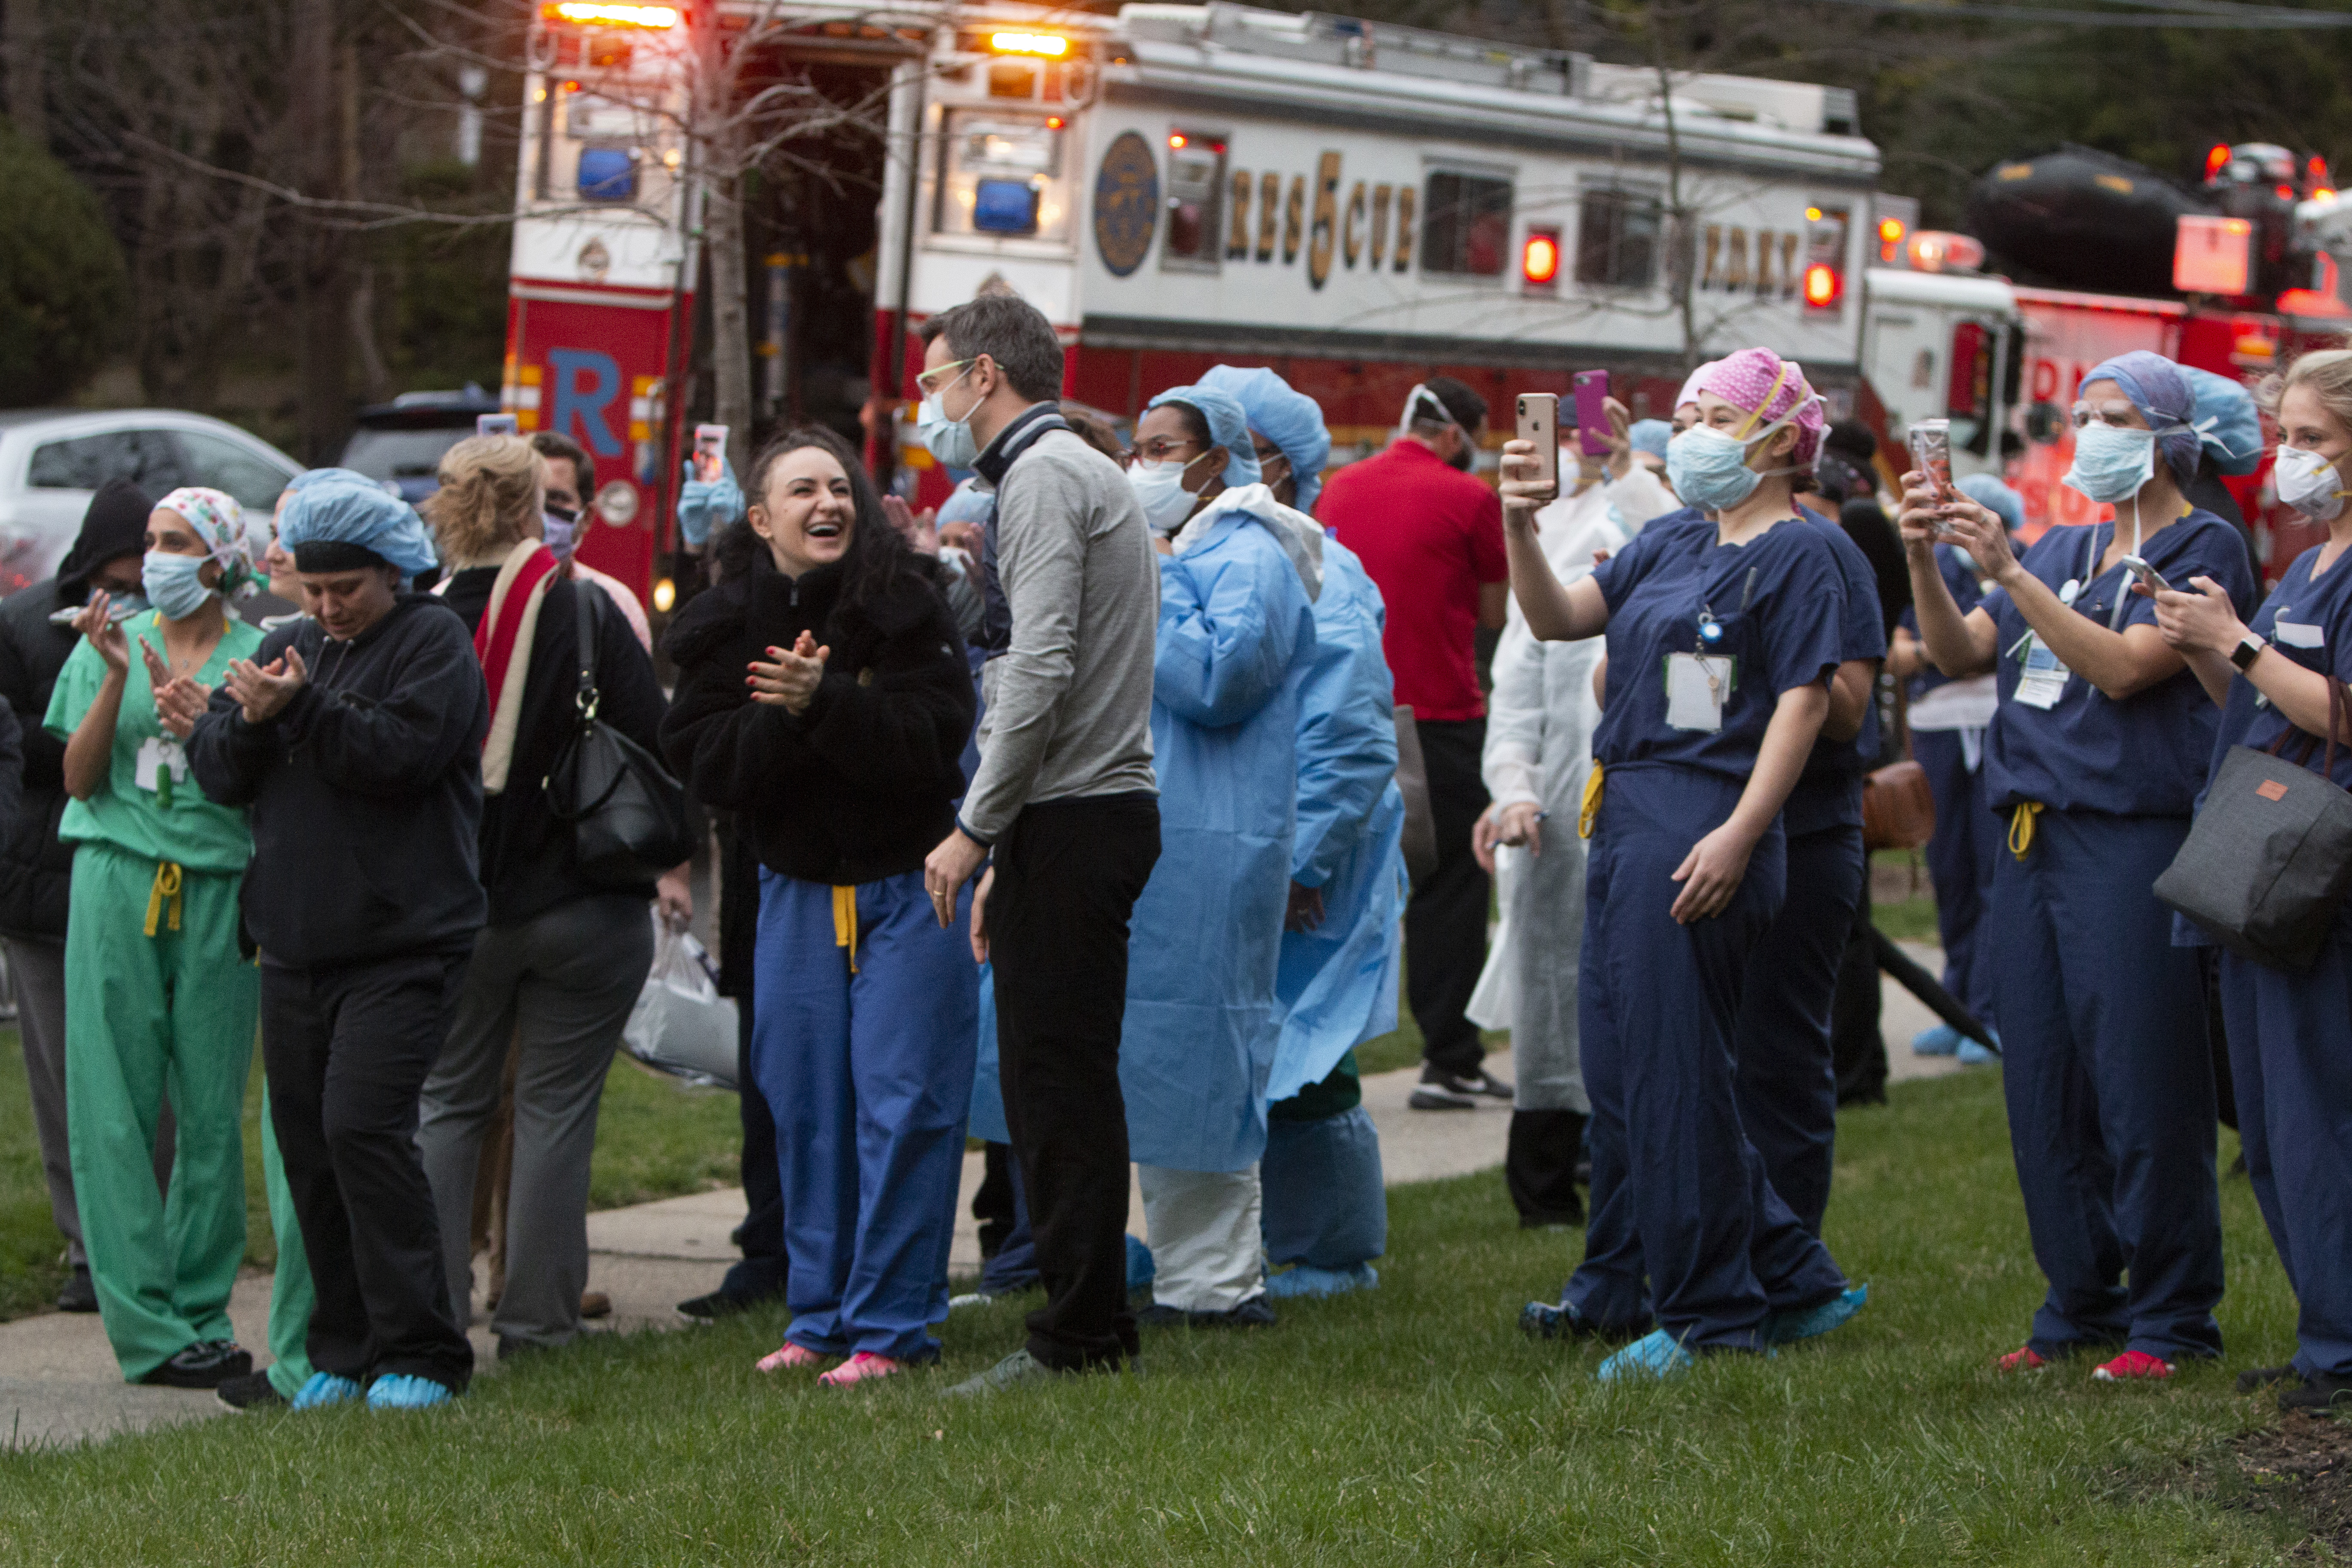 First responders gathered outside Richmond University Hospital on Friday, April 3, 2020 to applaud the hospital's staff. (Staten Island Advance/ Paul Liotta)